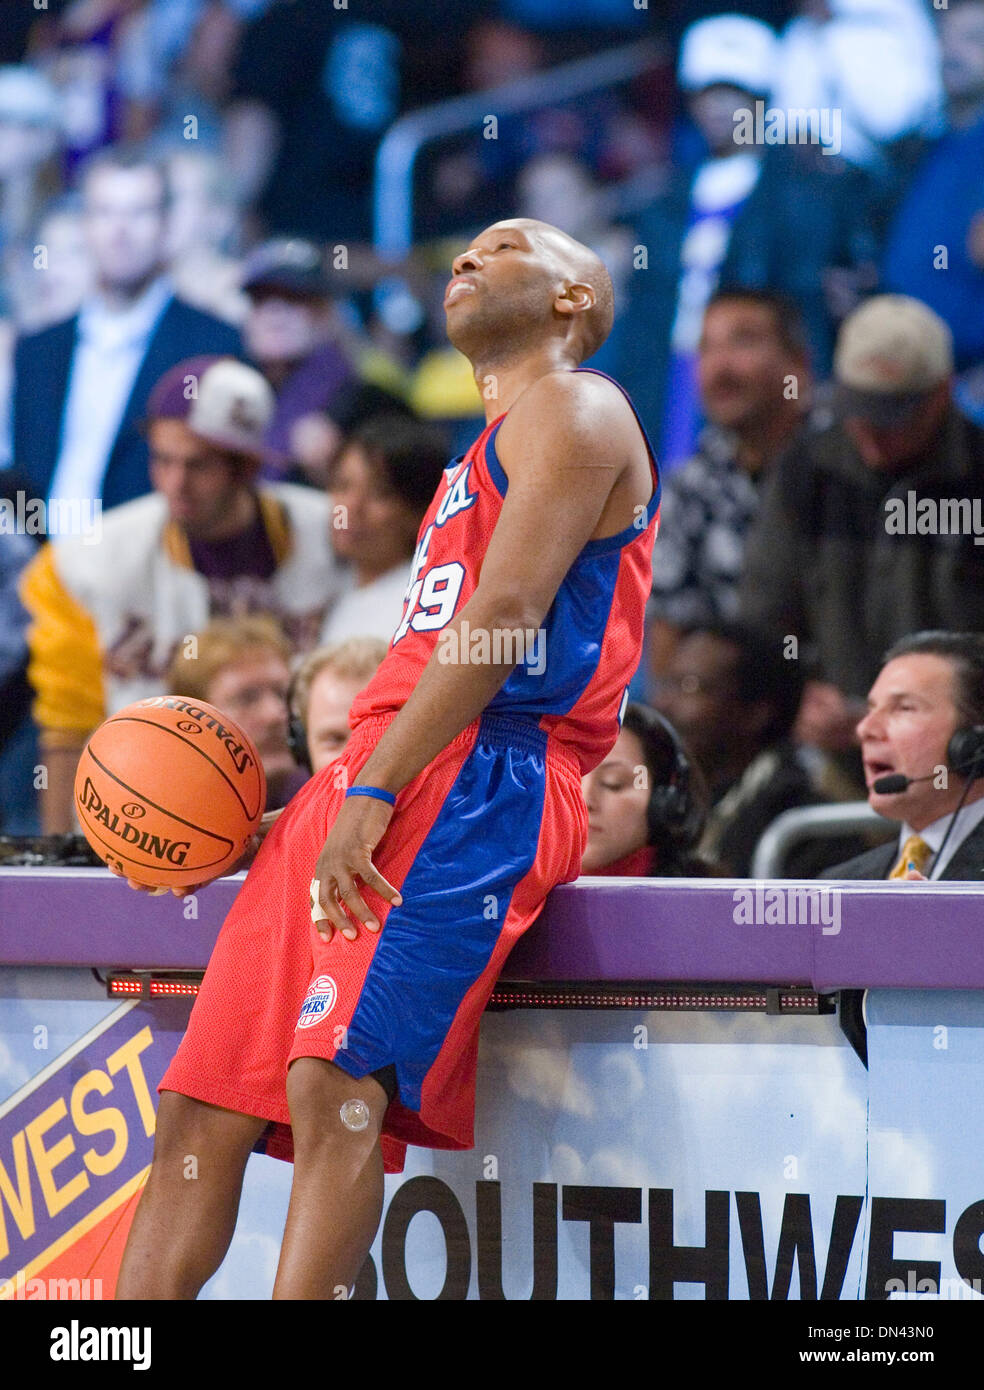 Nov 21, 2006; Los Angeles, CA, USA; Basketball player SAM CASSELL (19) of the Los Angeles Clippers looks at the scoreboard as the Los Angeles Lakers win the game 105 to 101 at the Staples Center in Los Angeles, CA. Mandatory Credit: Photo by Armando Arorizo/ZUMA Press. (©) Copyright 2006 by Armando Arorizo Stock Photo